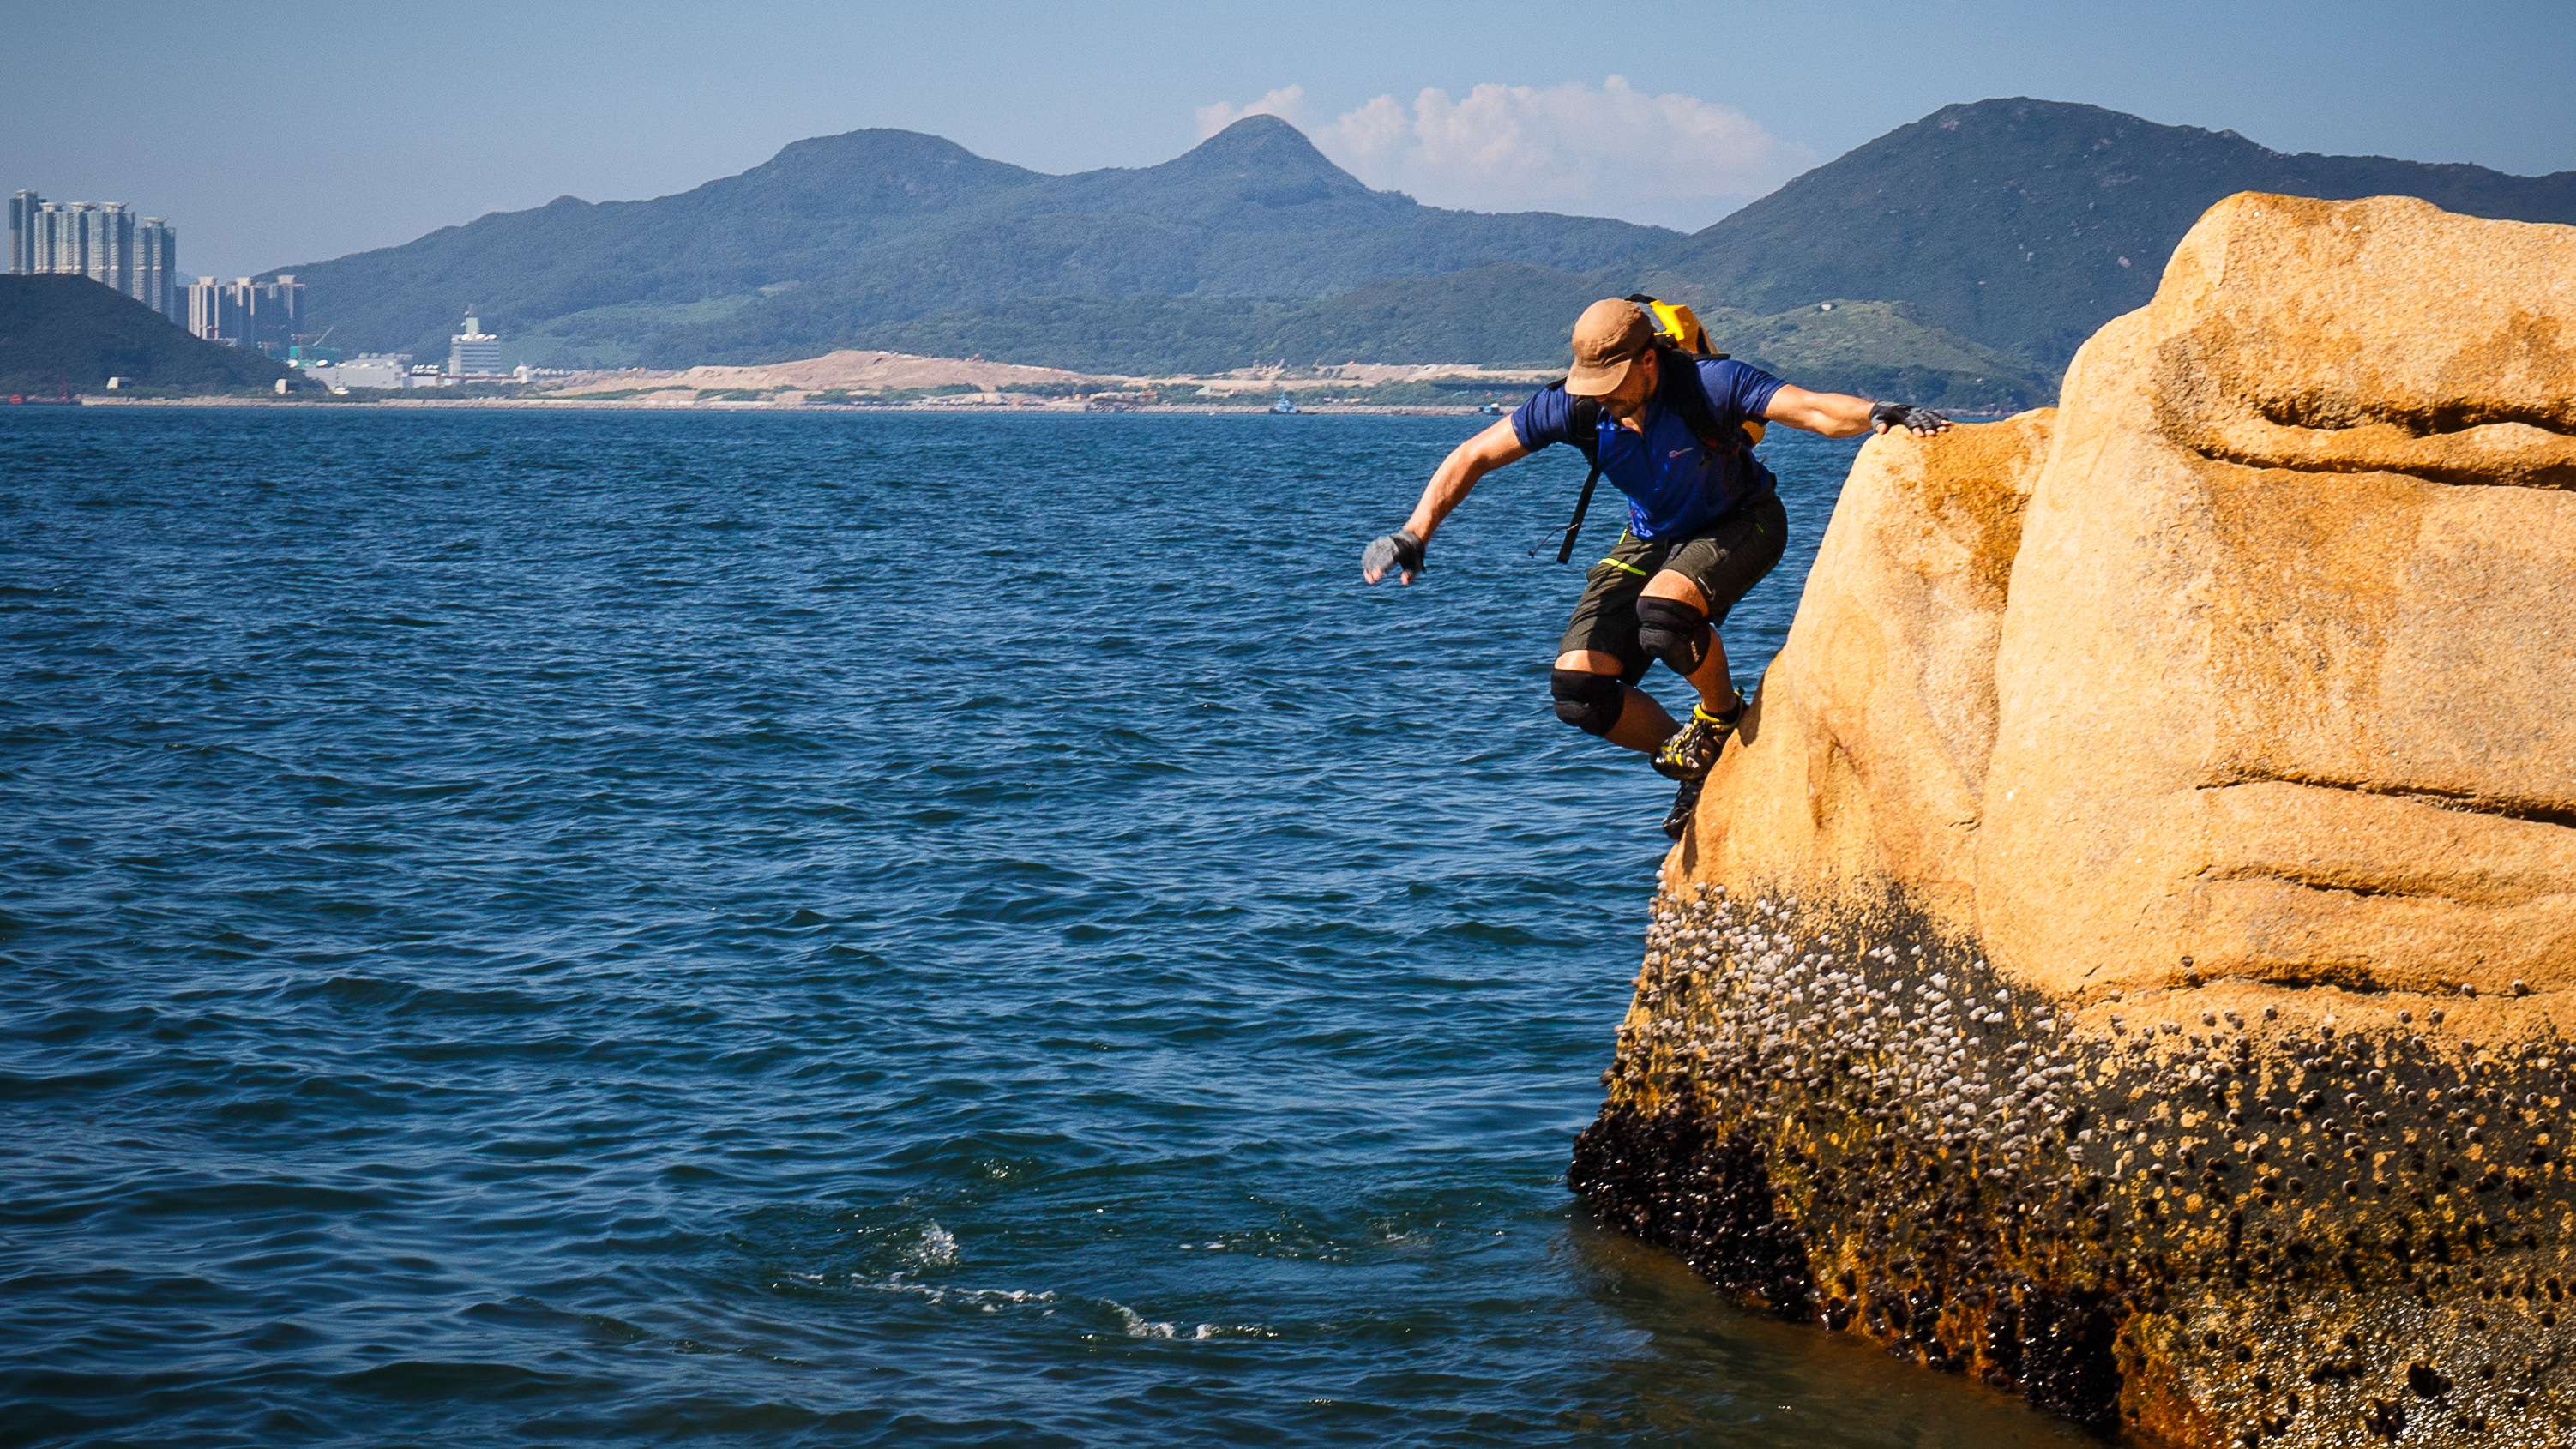 Hong Kong-based climber, adventurer and motivational speaker Paul Niel jumps off a granite rock into the water on the Shek O headland while coasteering. Photo: Tessa Chan